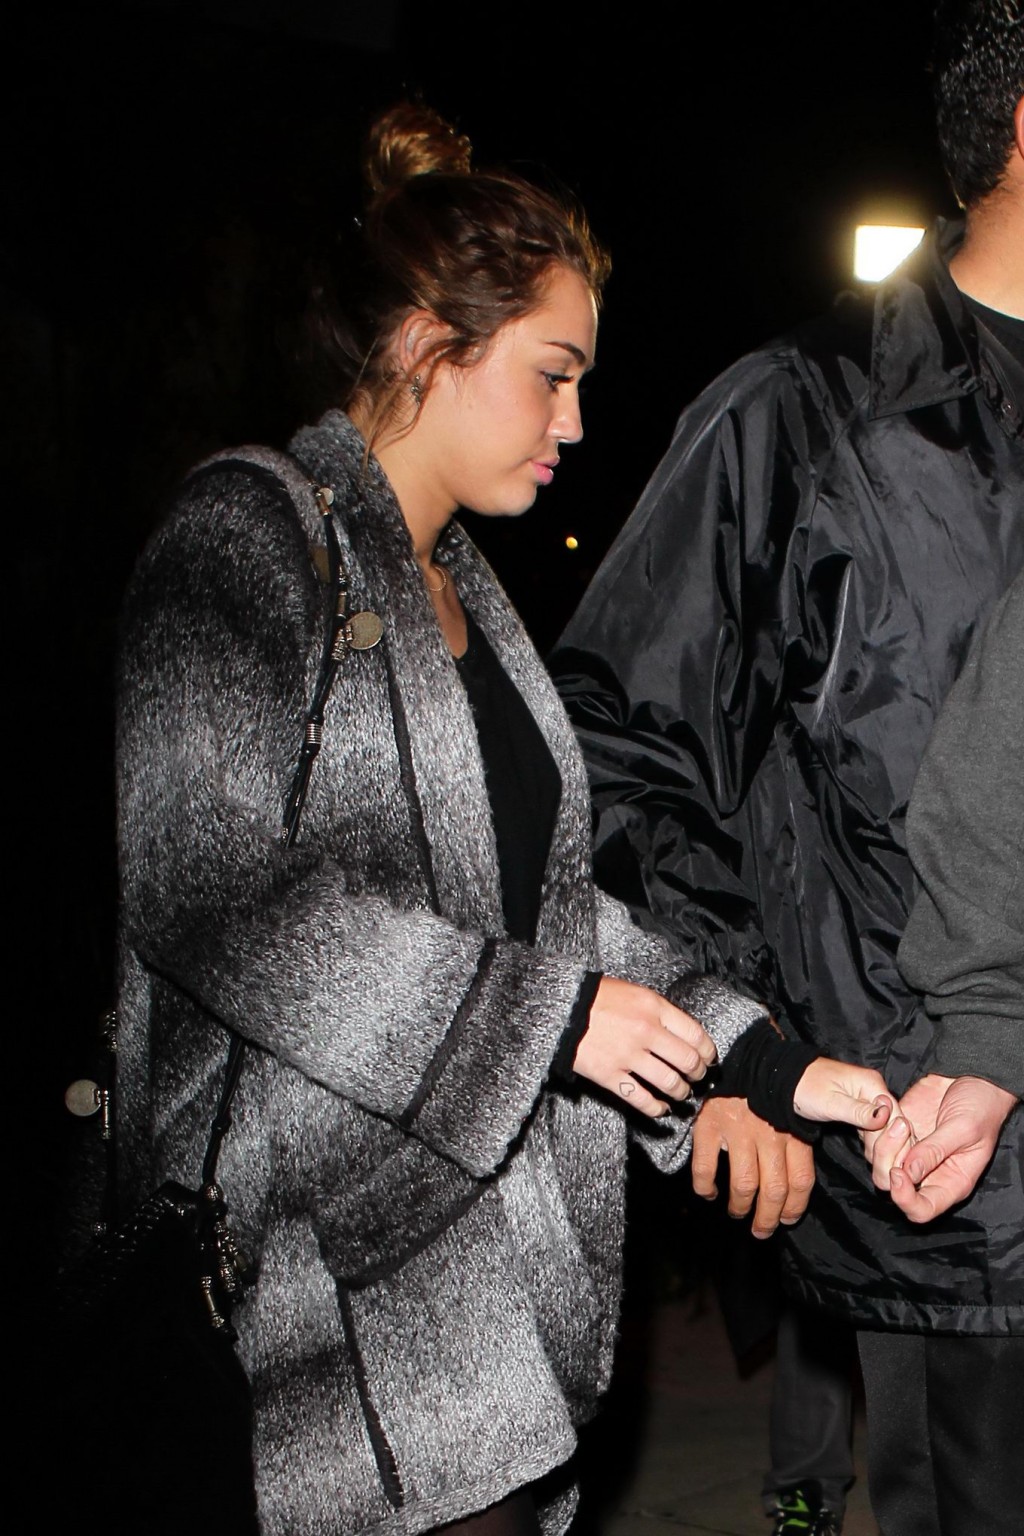 Miley Cyrus braless wearing black see through top outside a restaurant #75275431